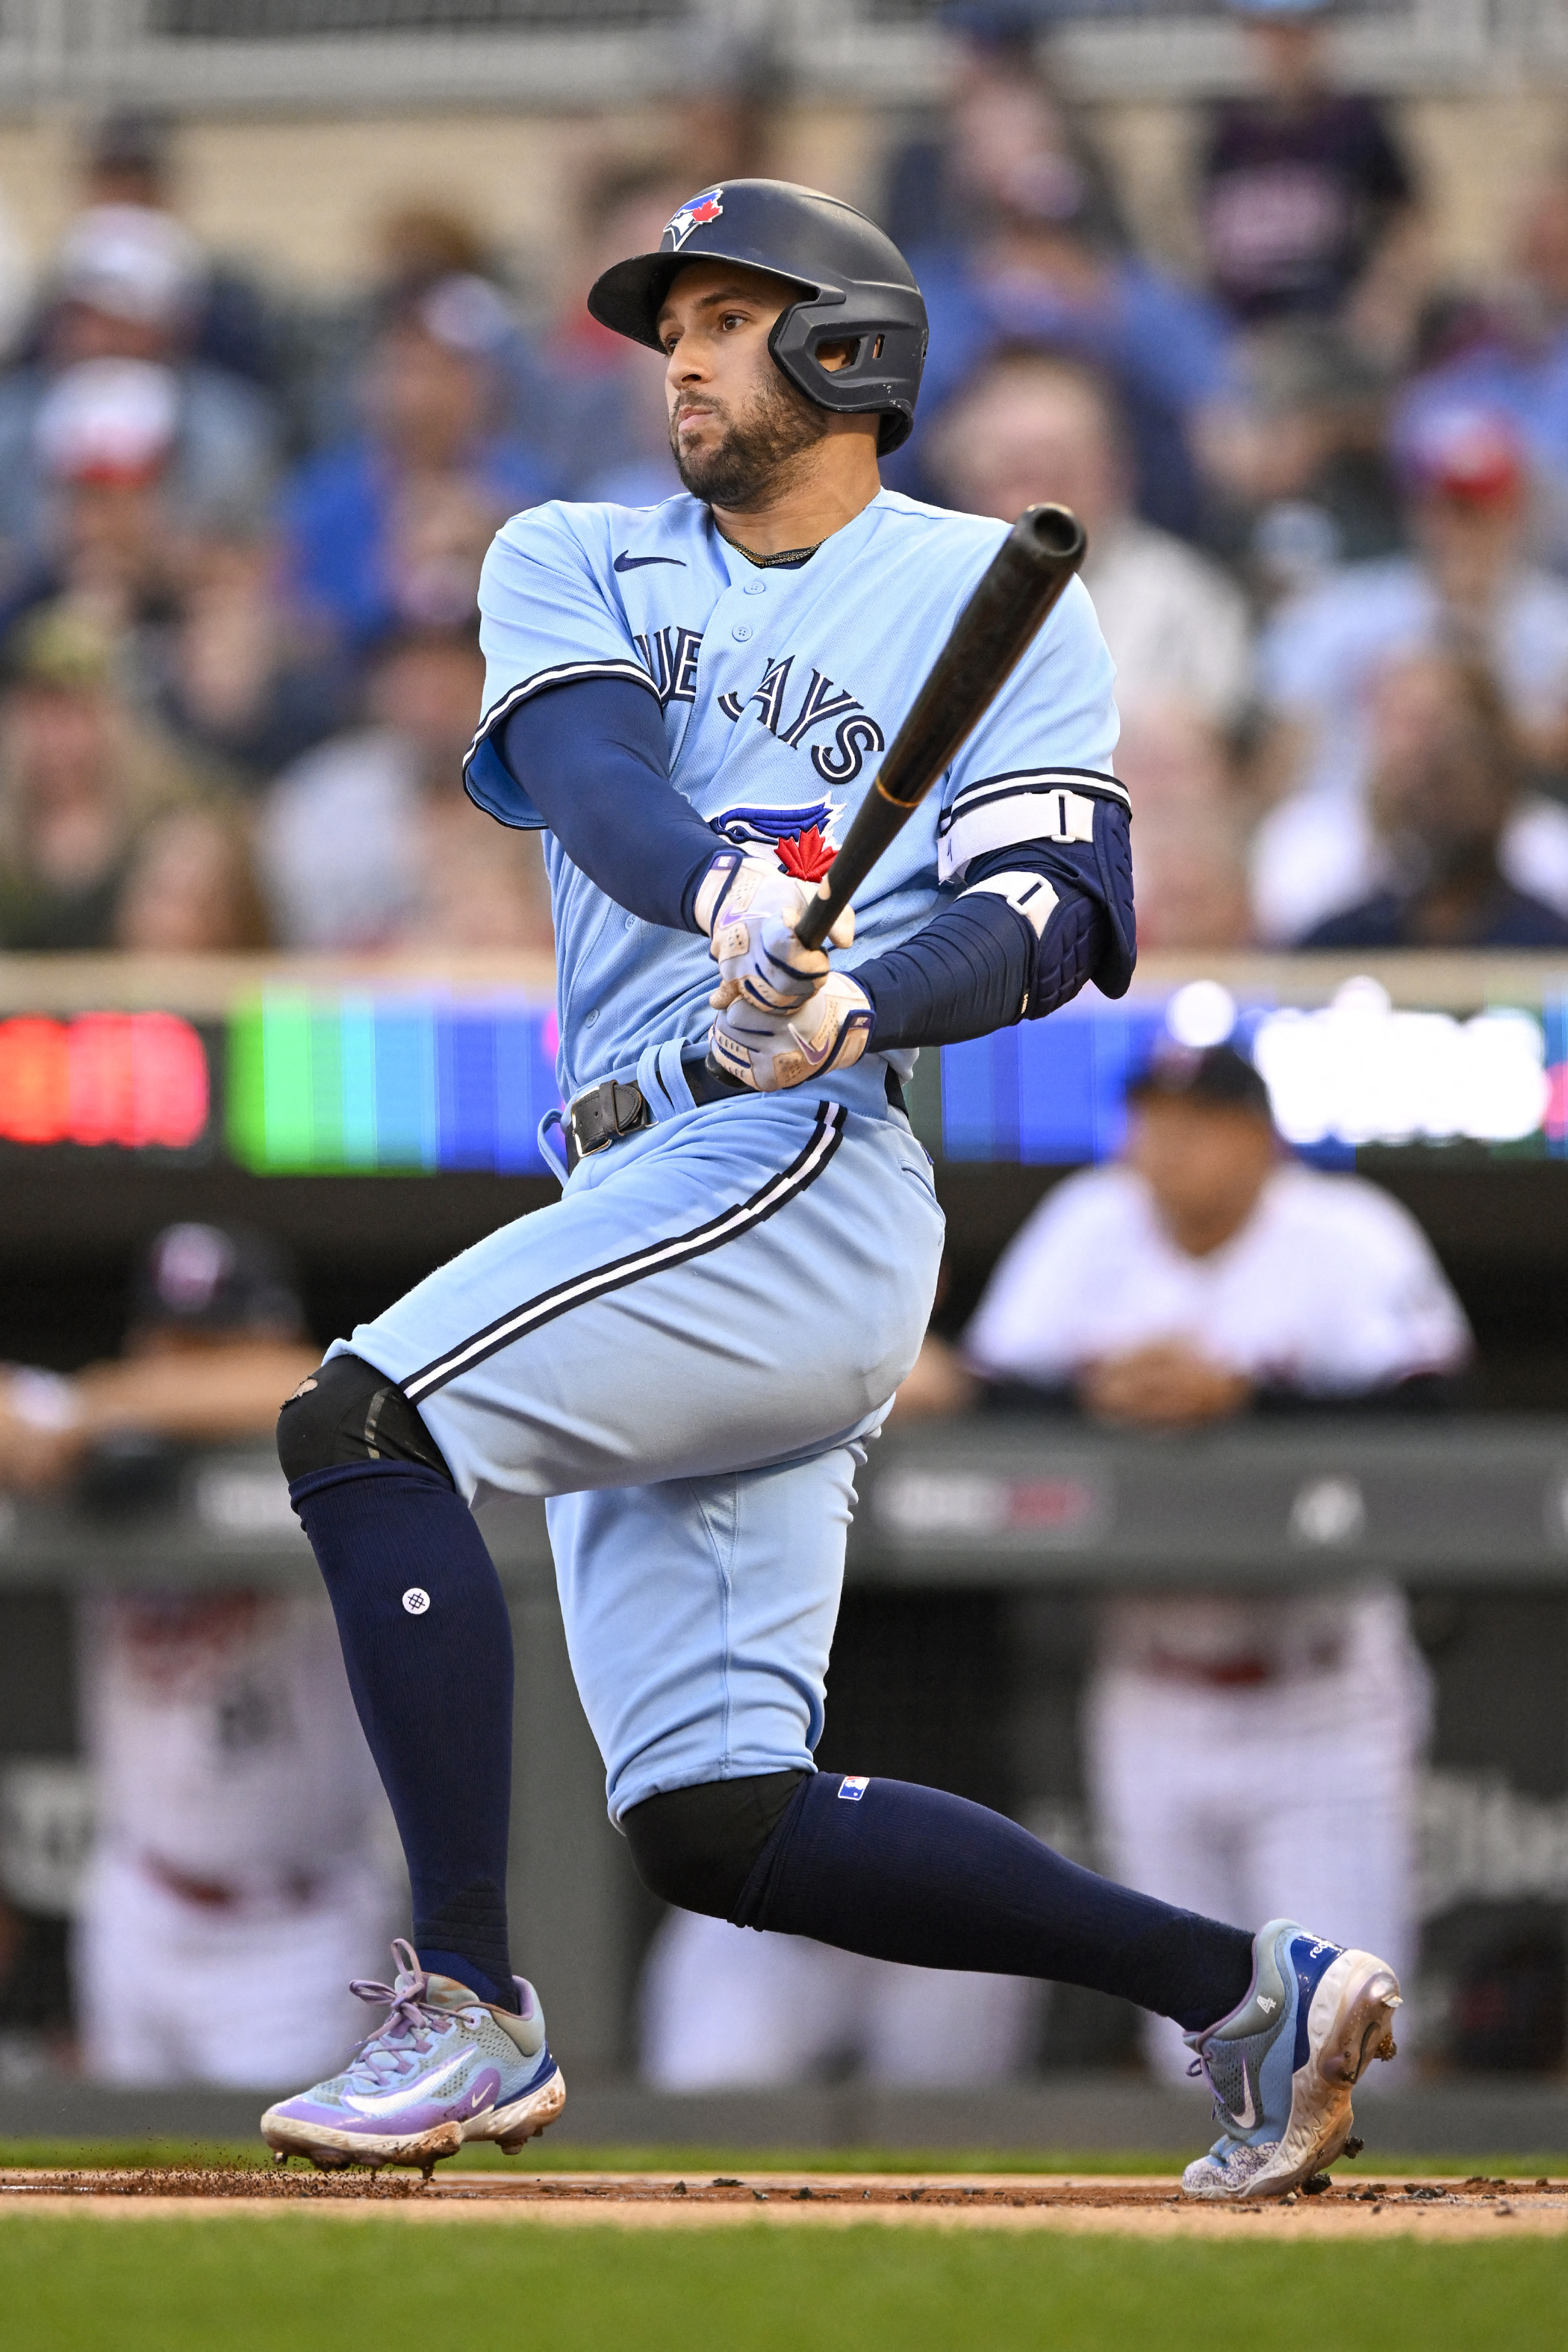 Report: Blue Jays agree to deal with Kiermaier